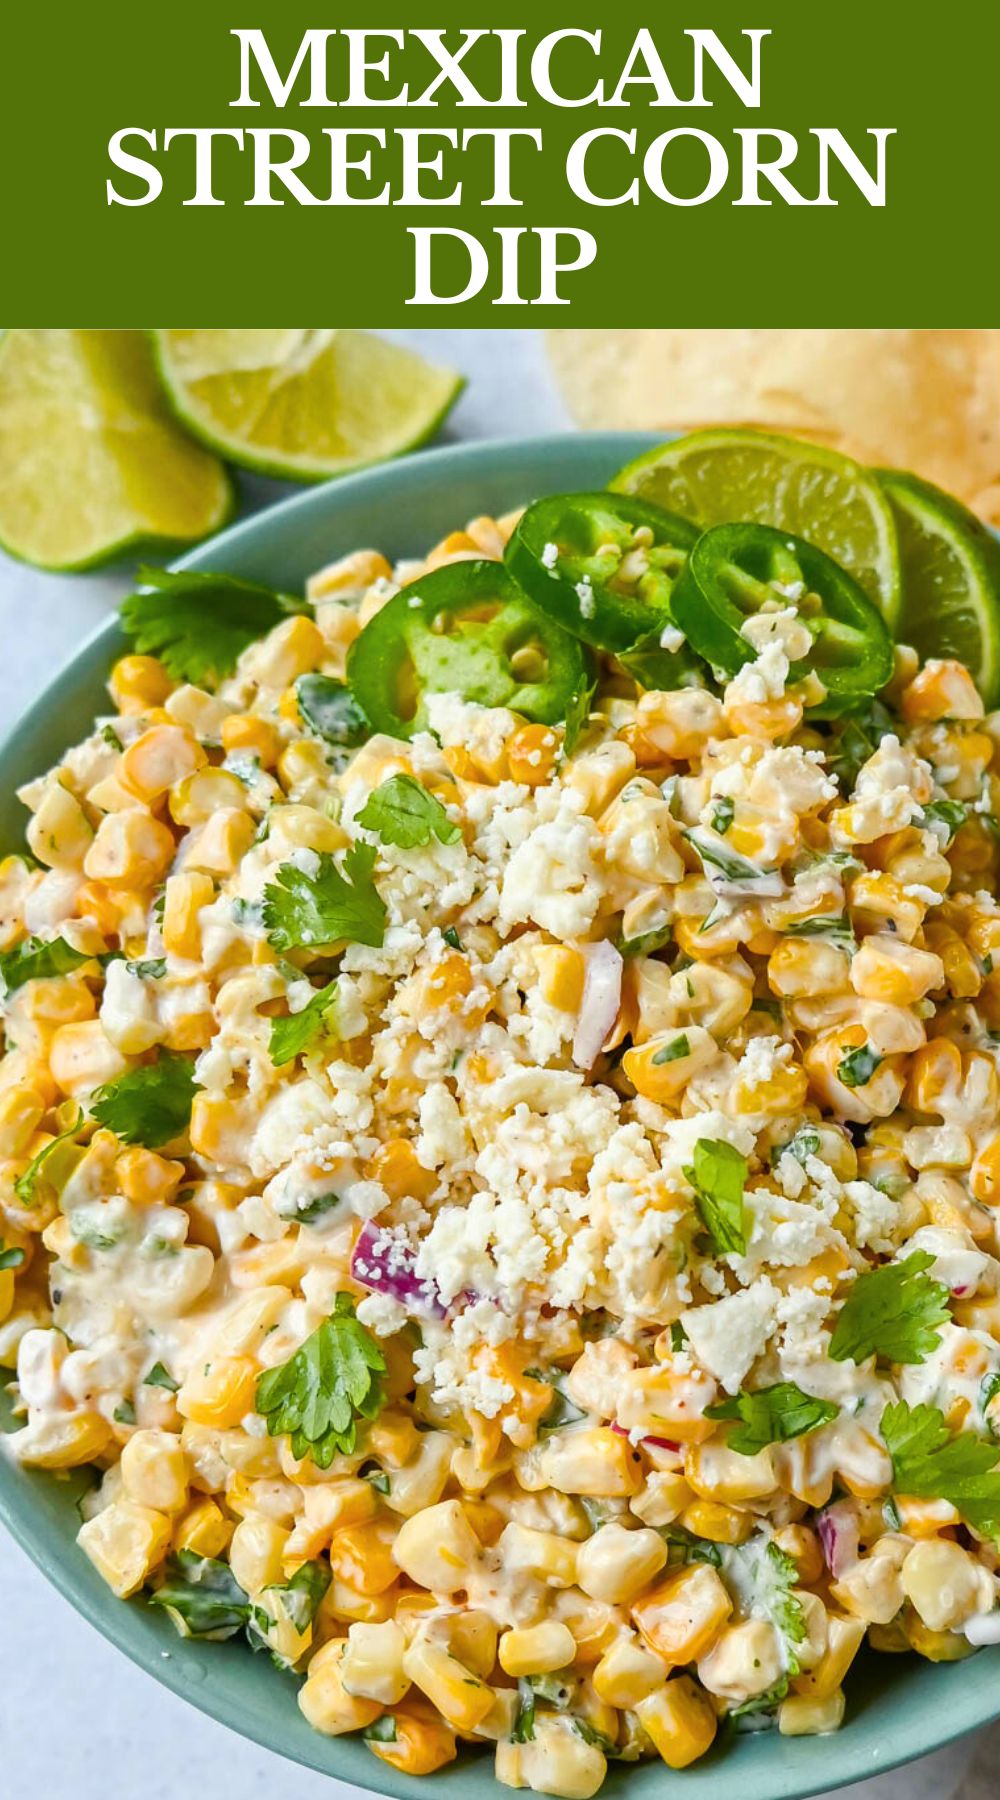 This Mexican Street Corn Dip is inspired by Mexican street corn. This corn dip is made with sweet roasted corn and mixed with red onion, cilantro, jalapeño, lime juice, mexican spices, a touch of mayo, and cotija cheese. This can also be called Mexican Street Corn Salad.